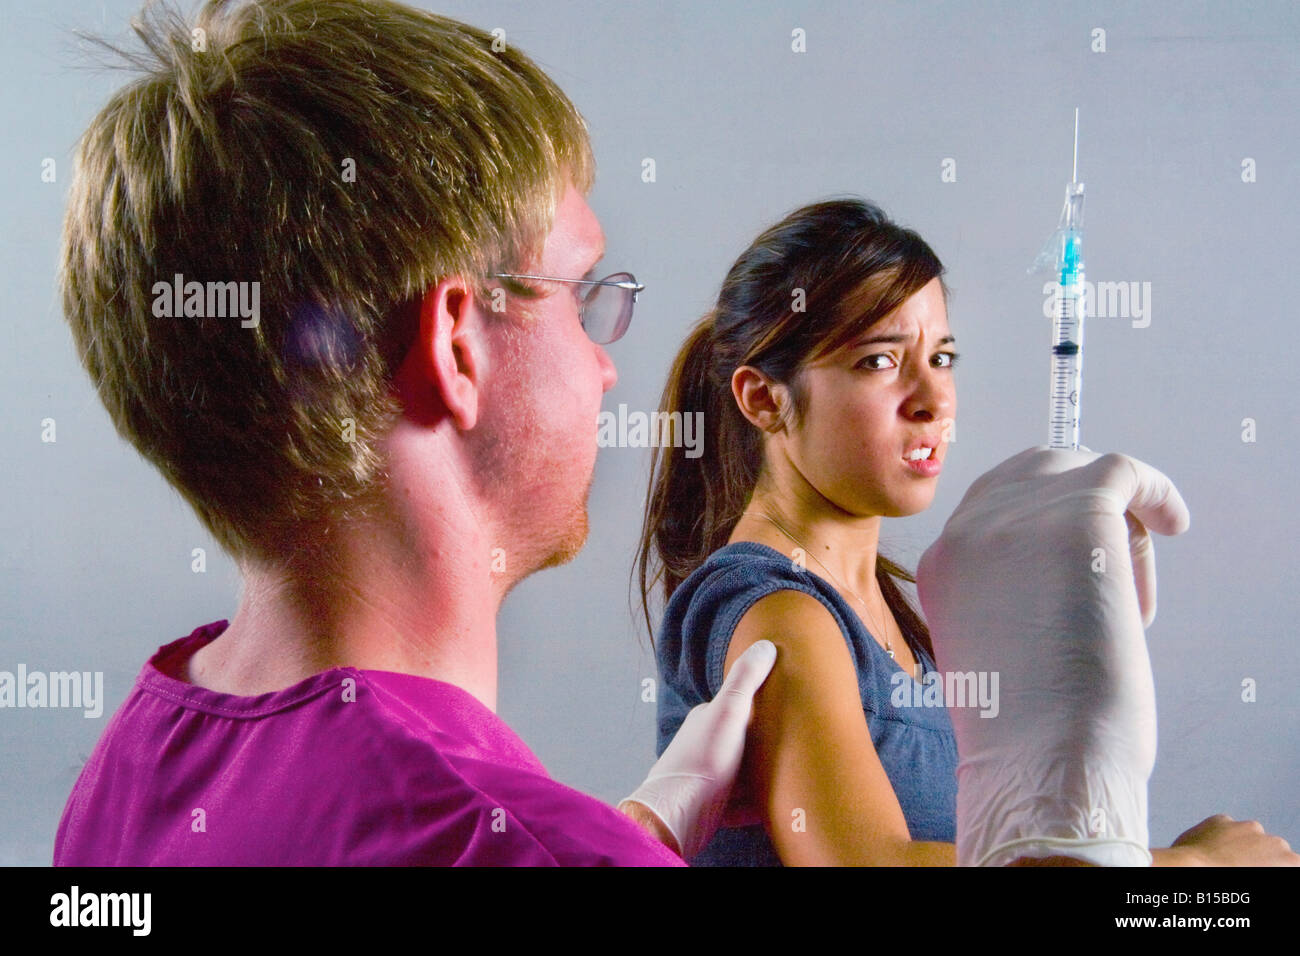 A young woman winces at the prospect of an injection as a medical professional brandishes a hypodermic syringe Stock Photo